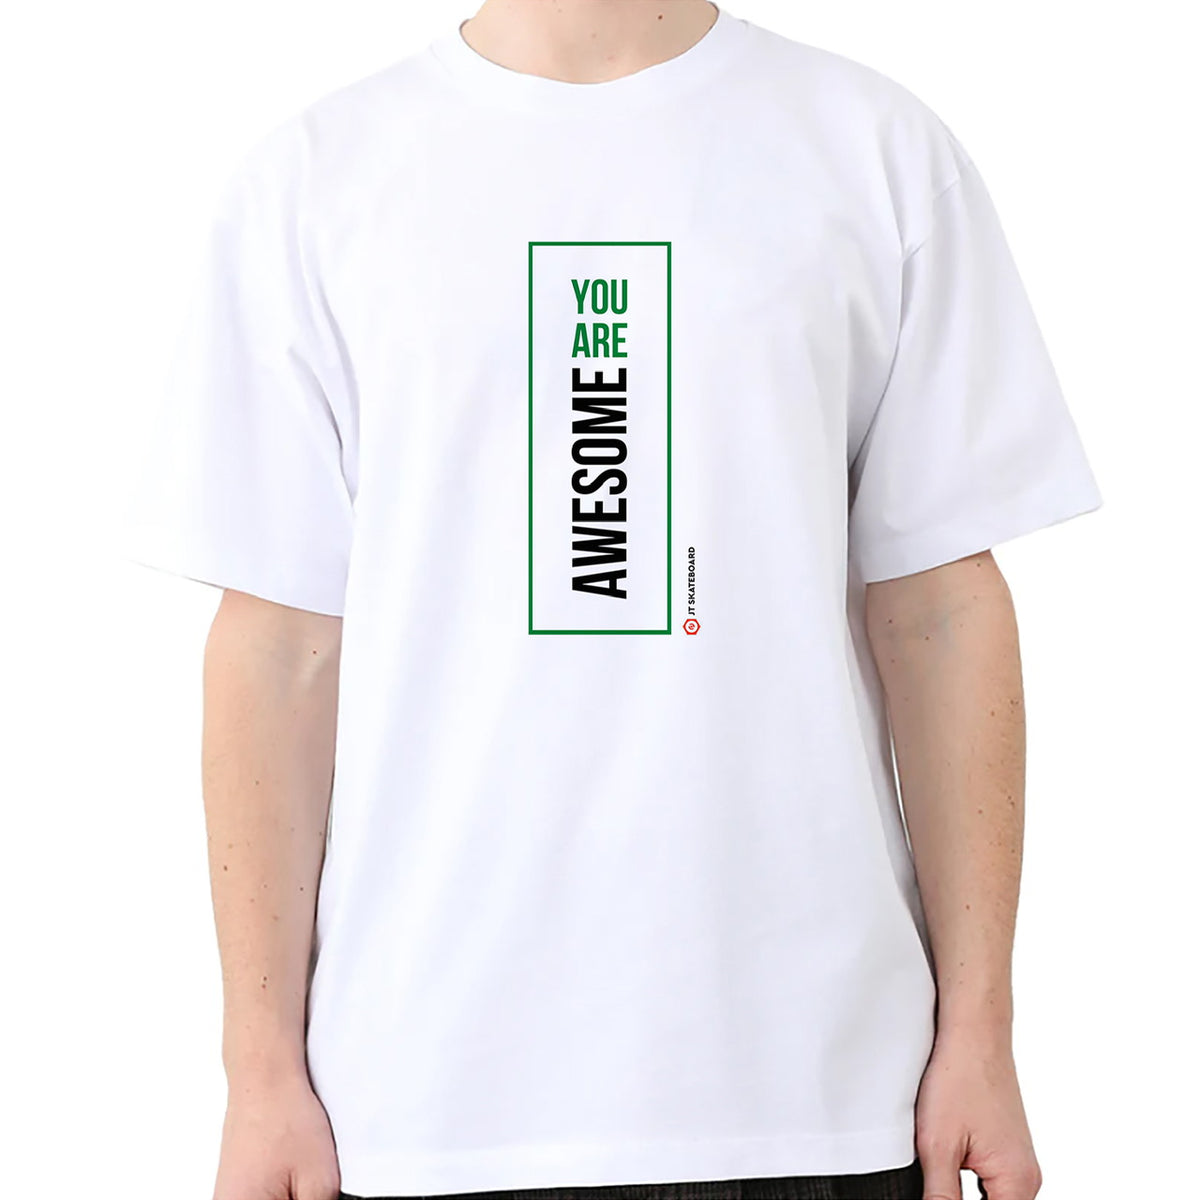 You are Awesome | Relaxed Loose Fitting T-Shirts - JT Skateboard - JT Skateboard